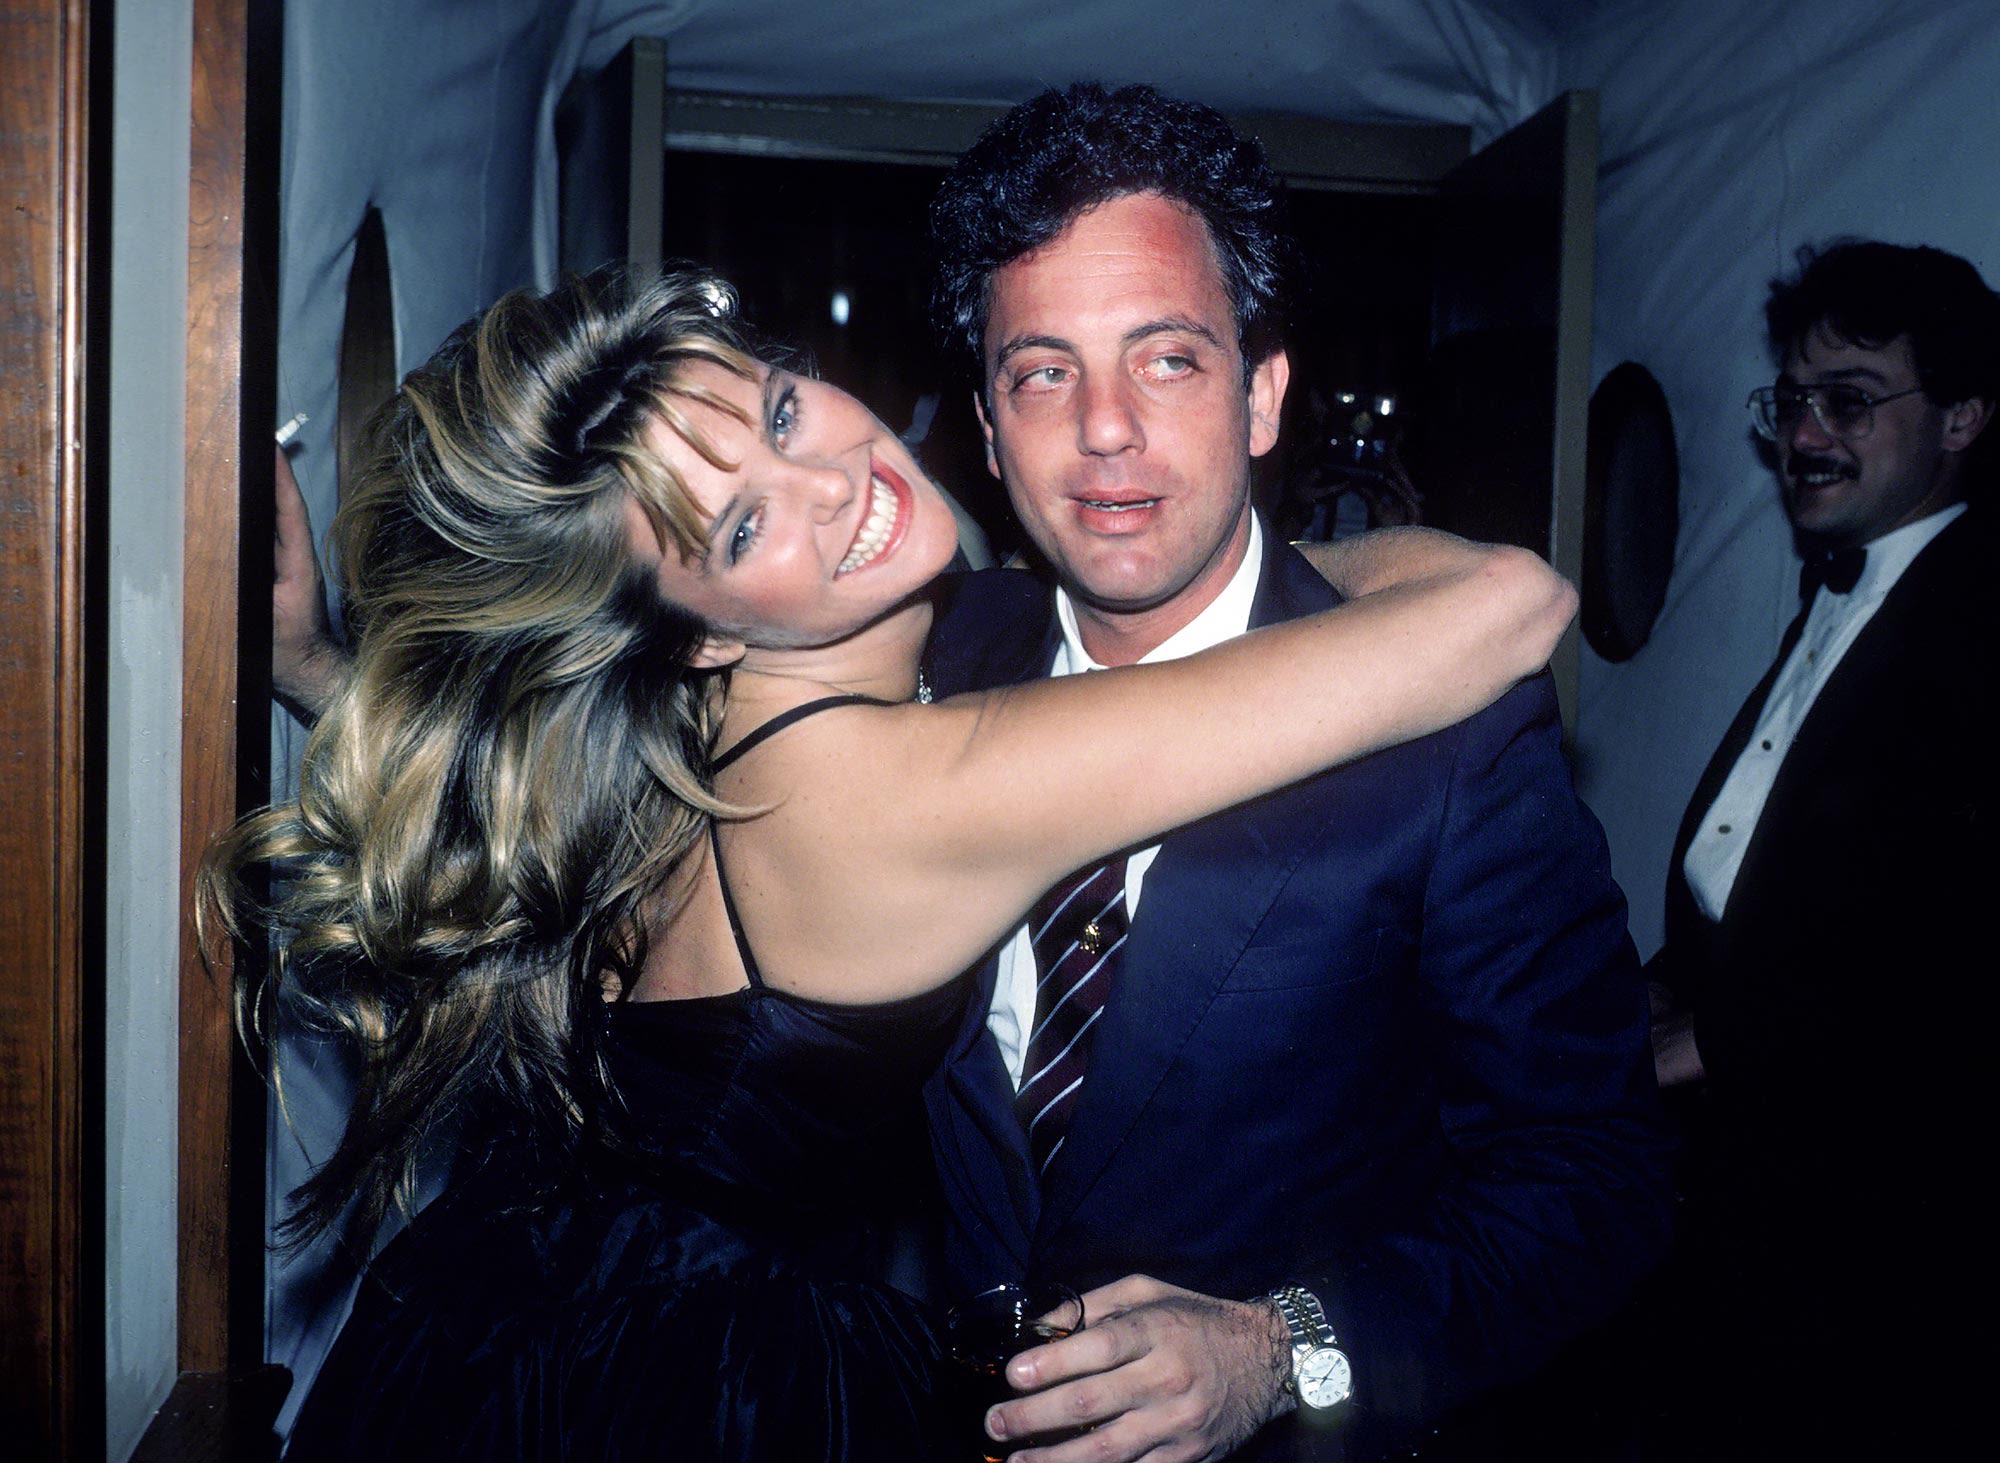 Billy Joel and Ex-Wife Christie Brinkley’s Relationship Timeline: Revisiting Their Romance